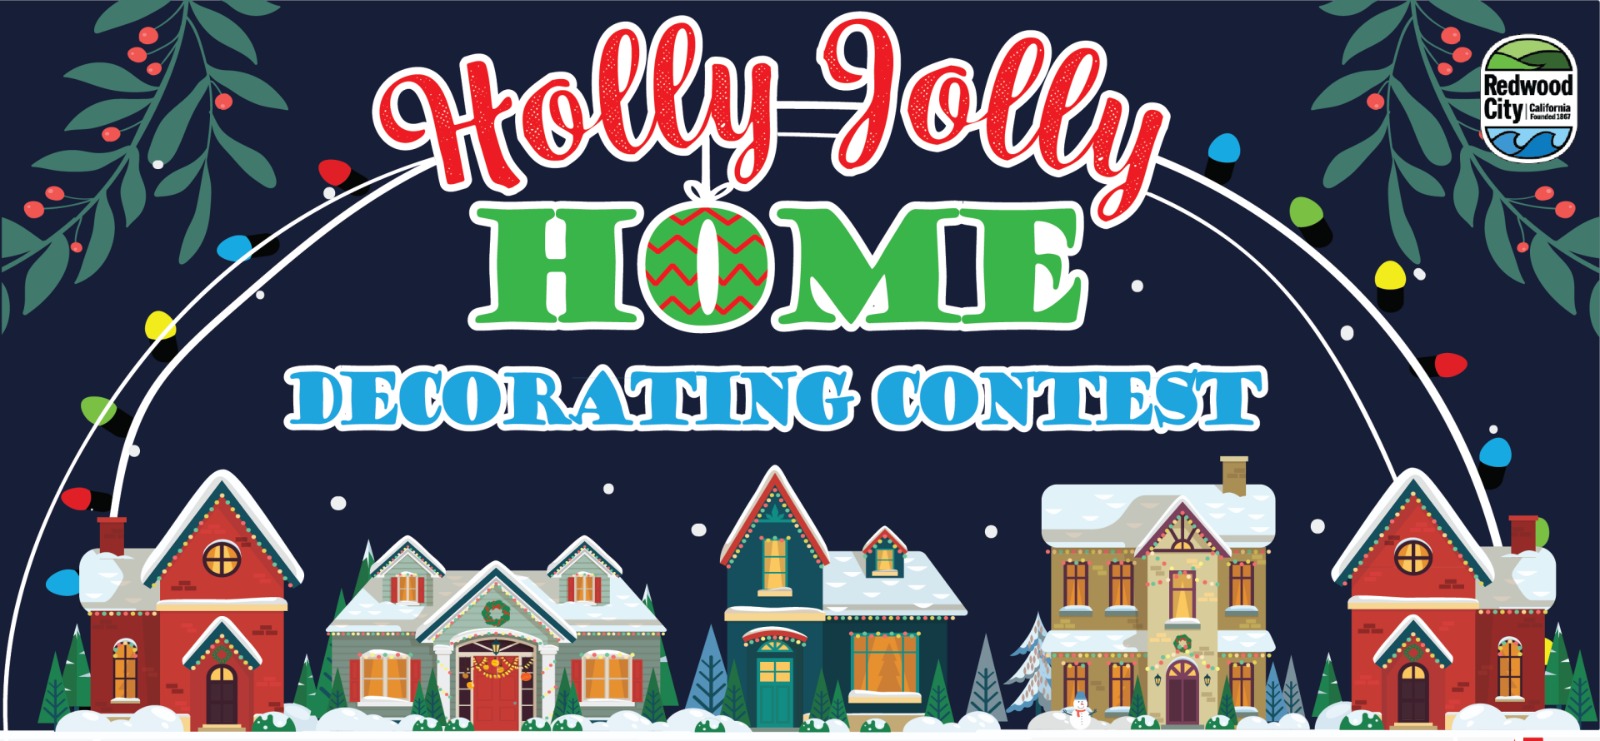 Redwood City is joining in with its annual Holly Jolly home decorating contest.